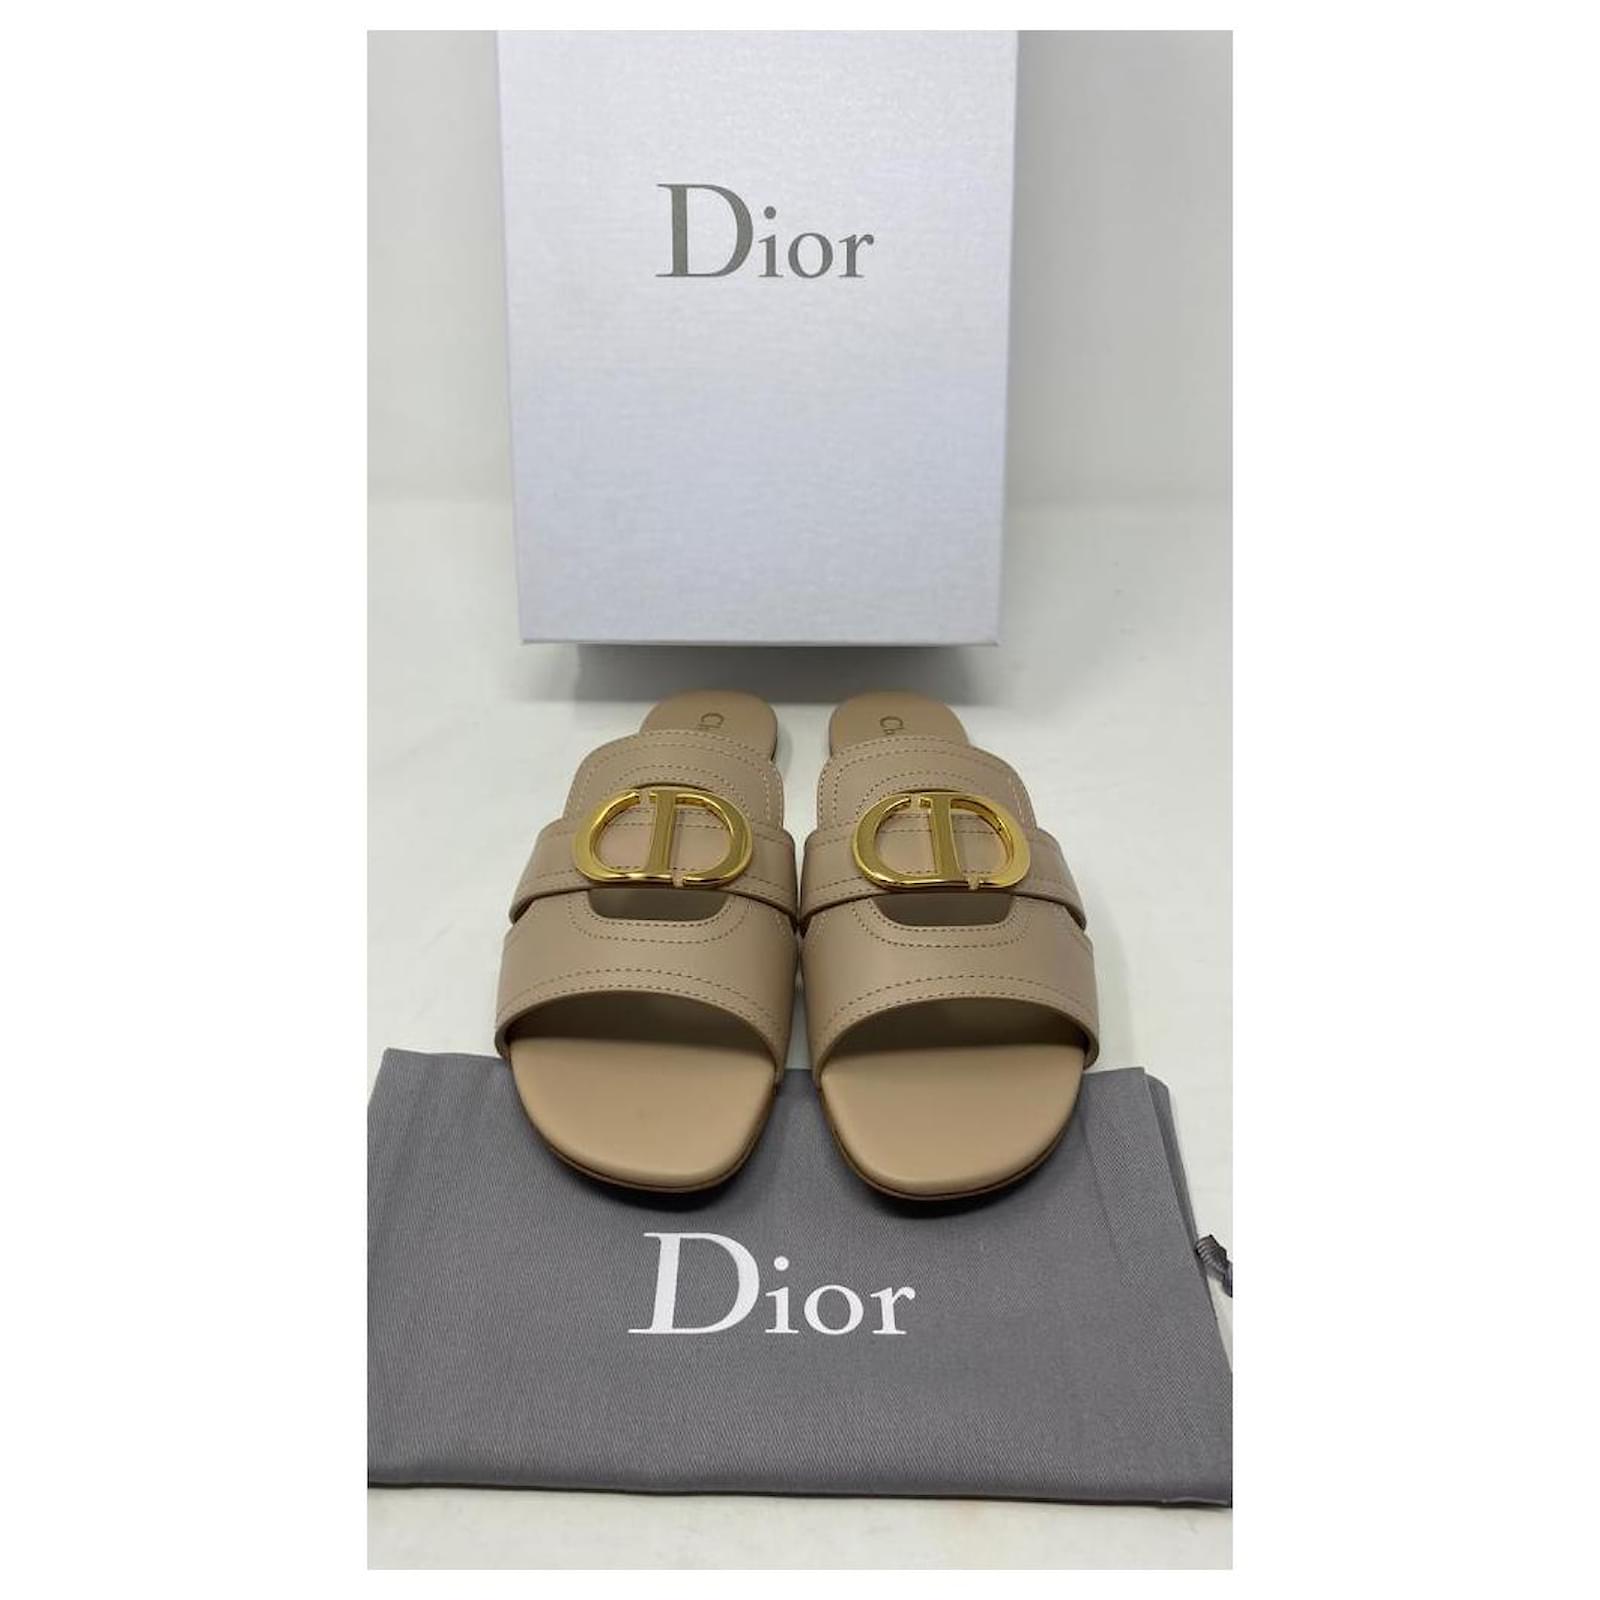 Dior - Authenticated 30 Montaigne Sandal - Leather White Plain for Women, Very Good Condition